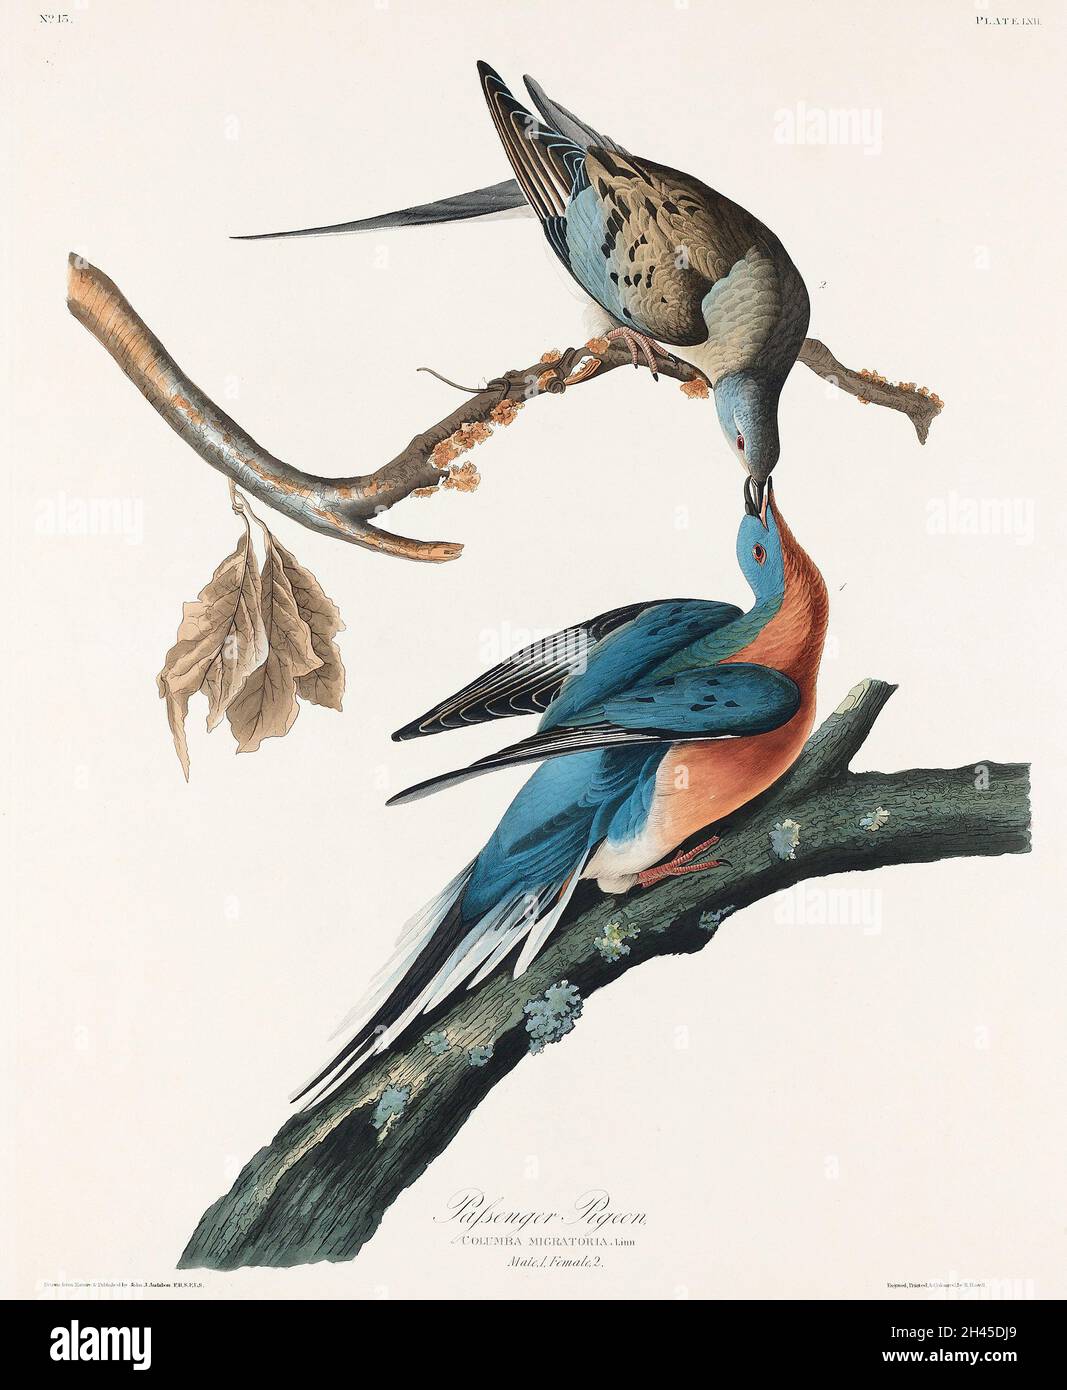 Passenger Pigeon from Birds of America (1827) by John James Audubon (1785 - 1851), etched by Robert Havell (1793 - 1878). The original Birds of Americ Stock Photo